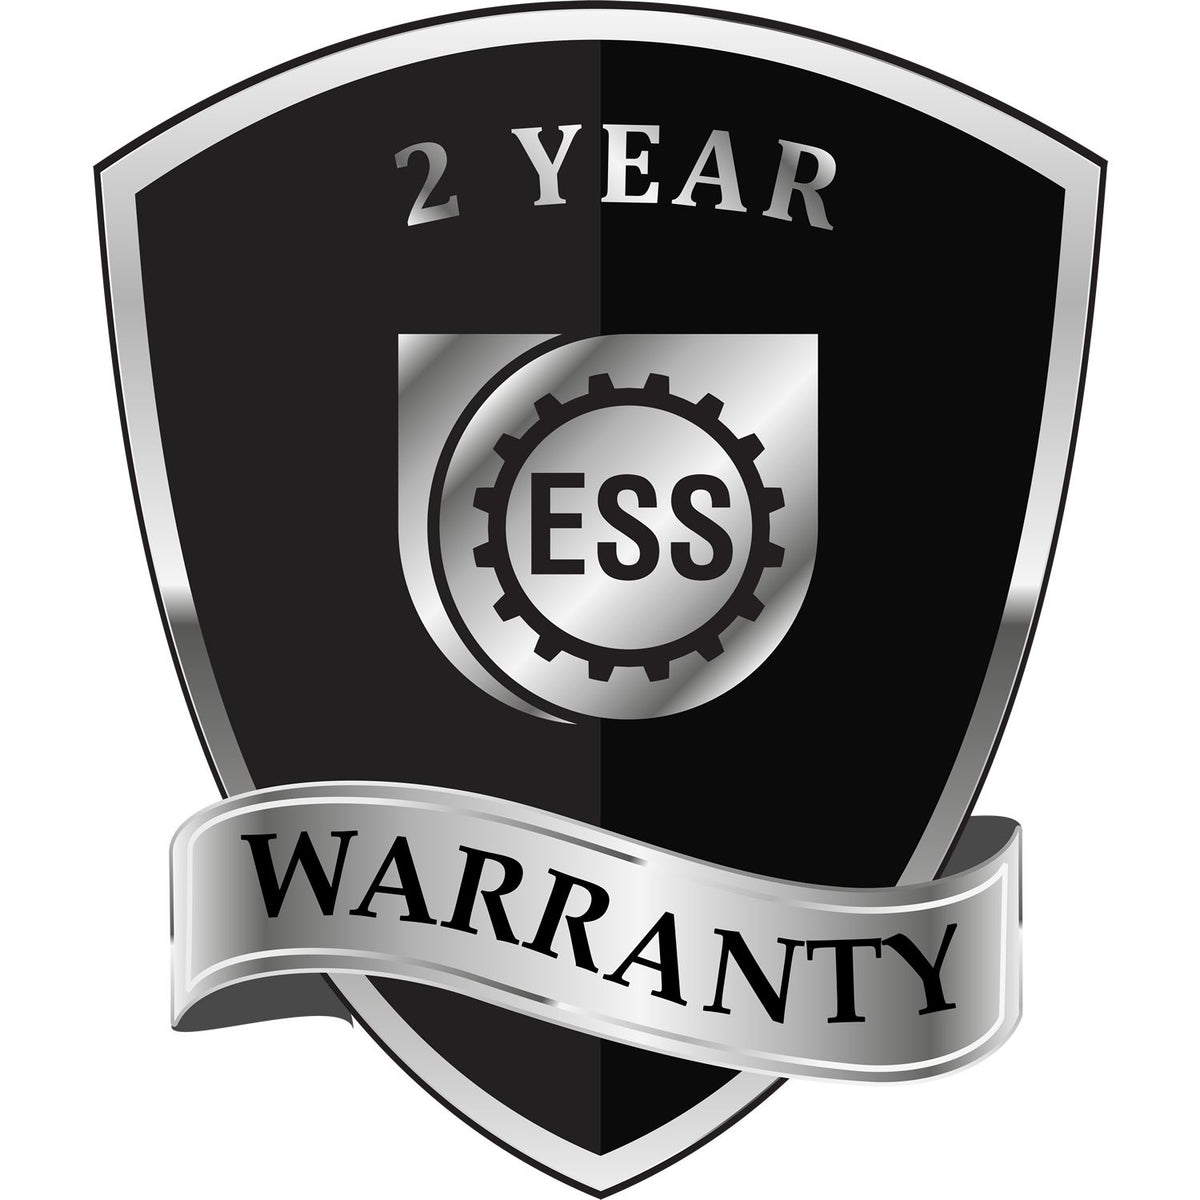 A black and silver badge or emblem showing warranty information for the Heavy Duty Cast Iron South Dakota Geologist Seal Embosser